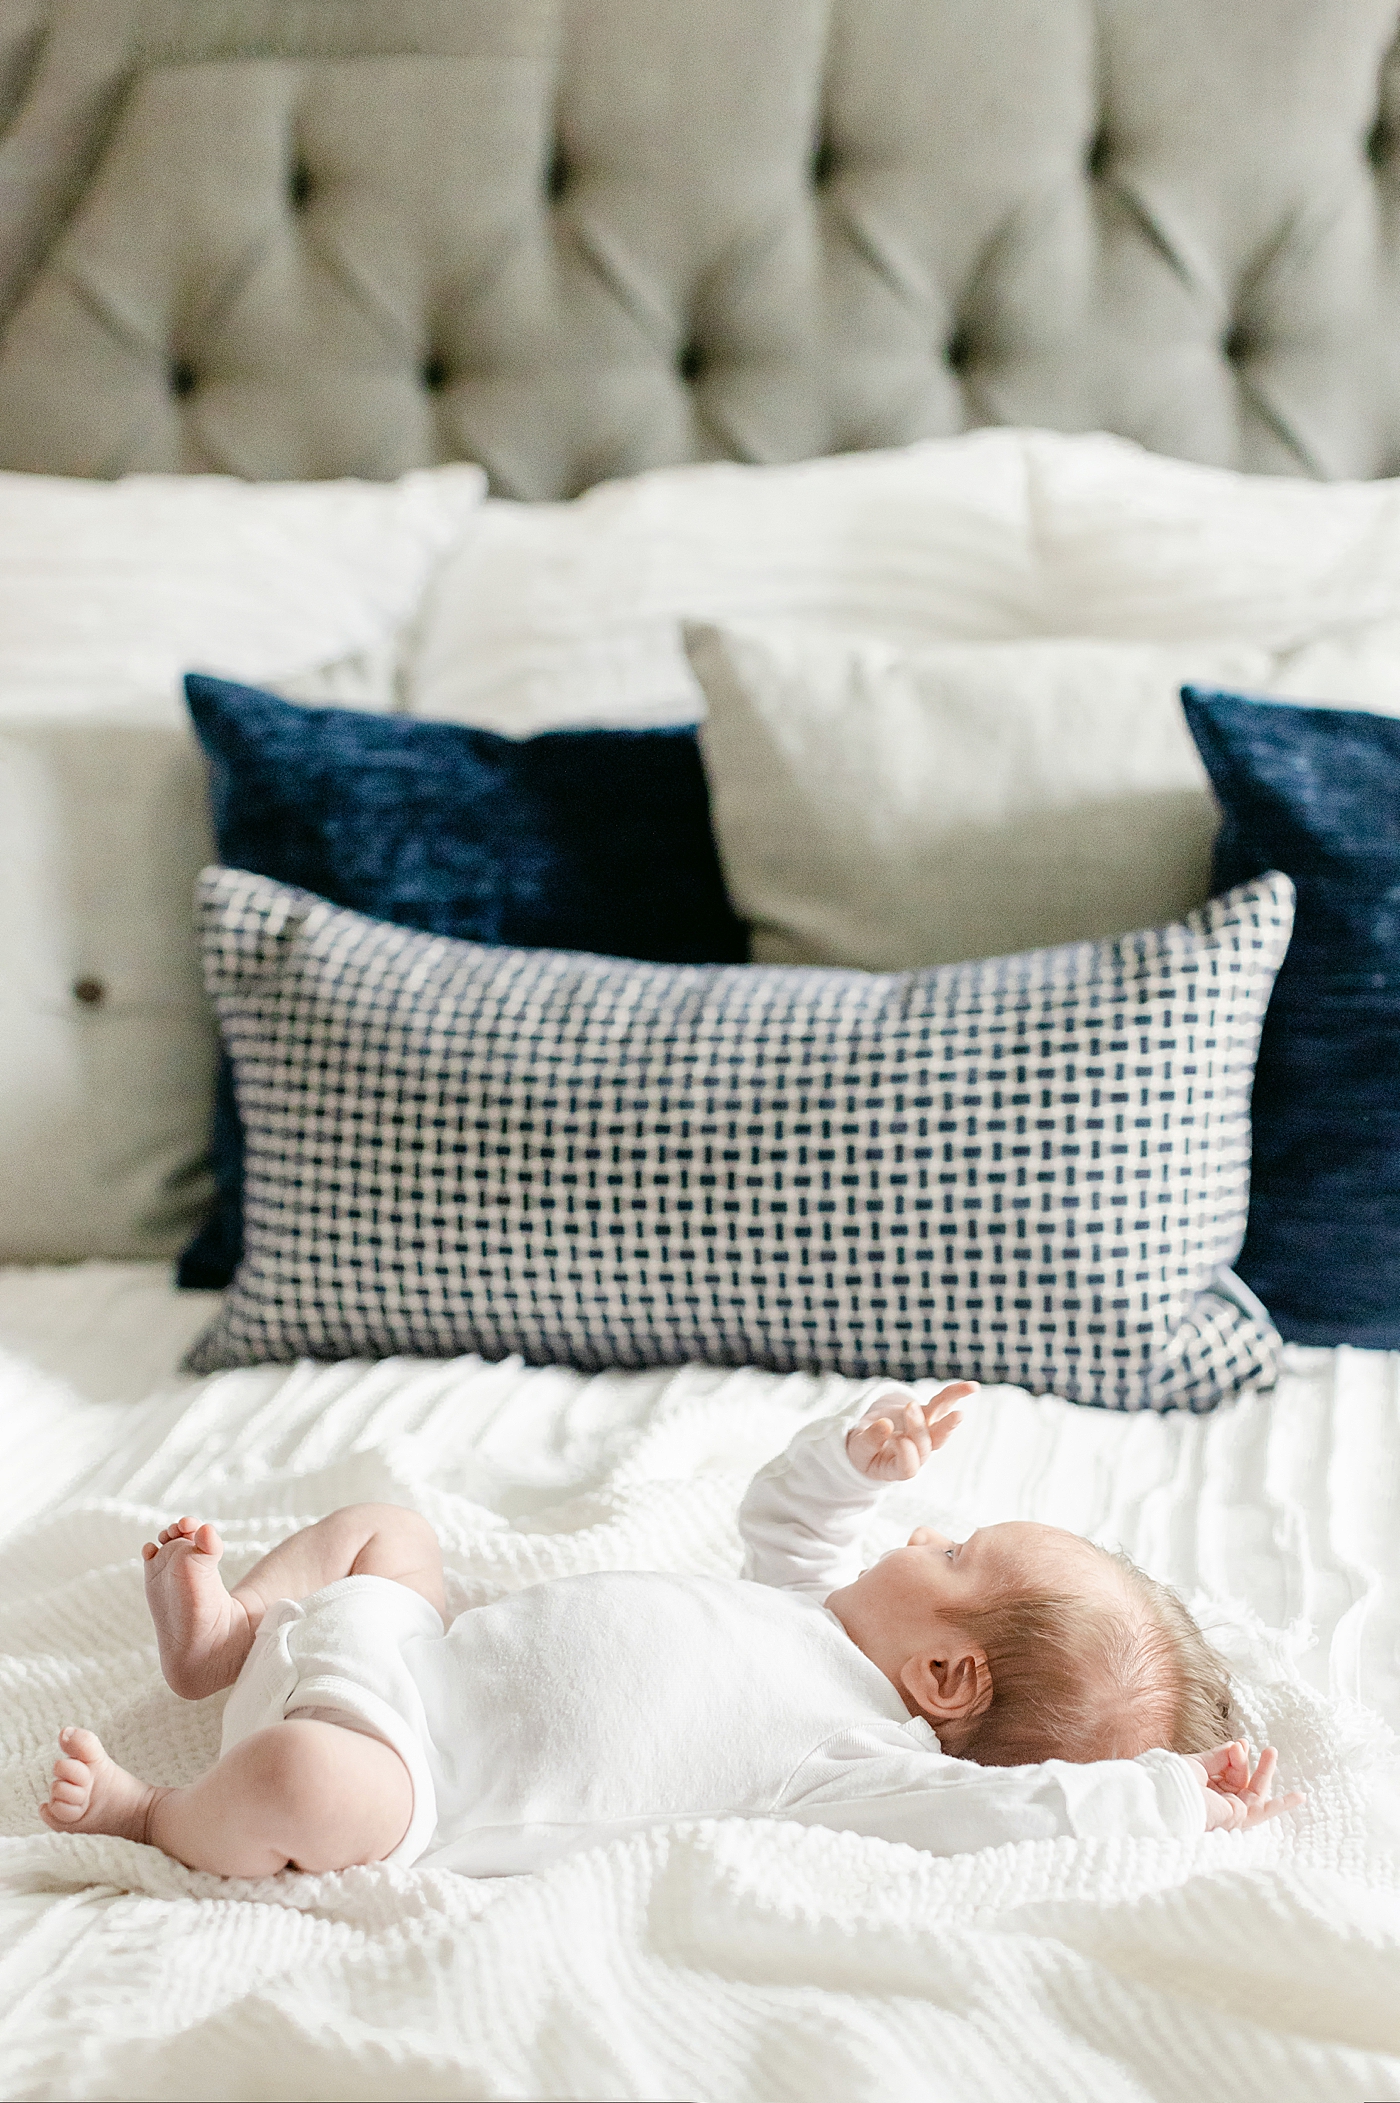 during their Charlotte In Home Newborn Session | Image by Chrissy Winchester 